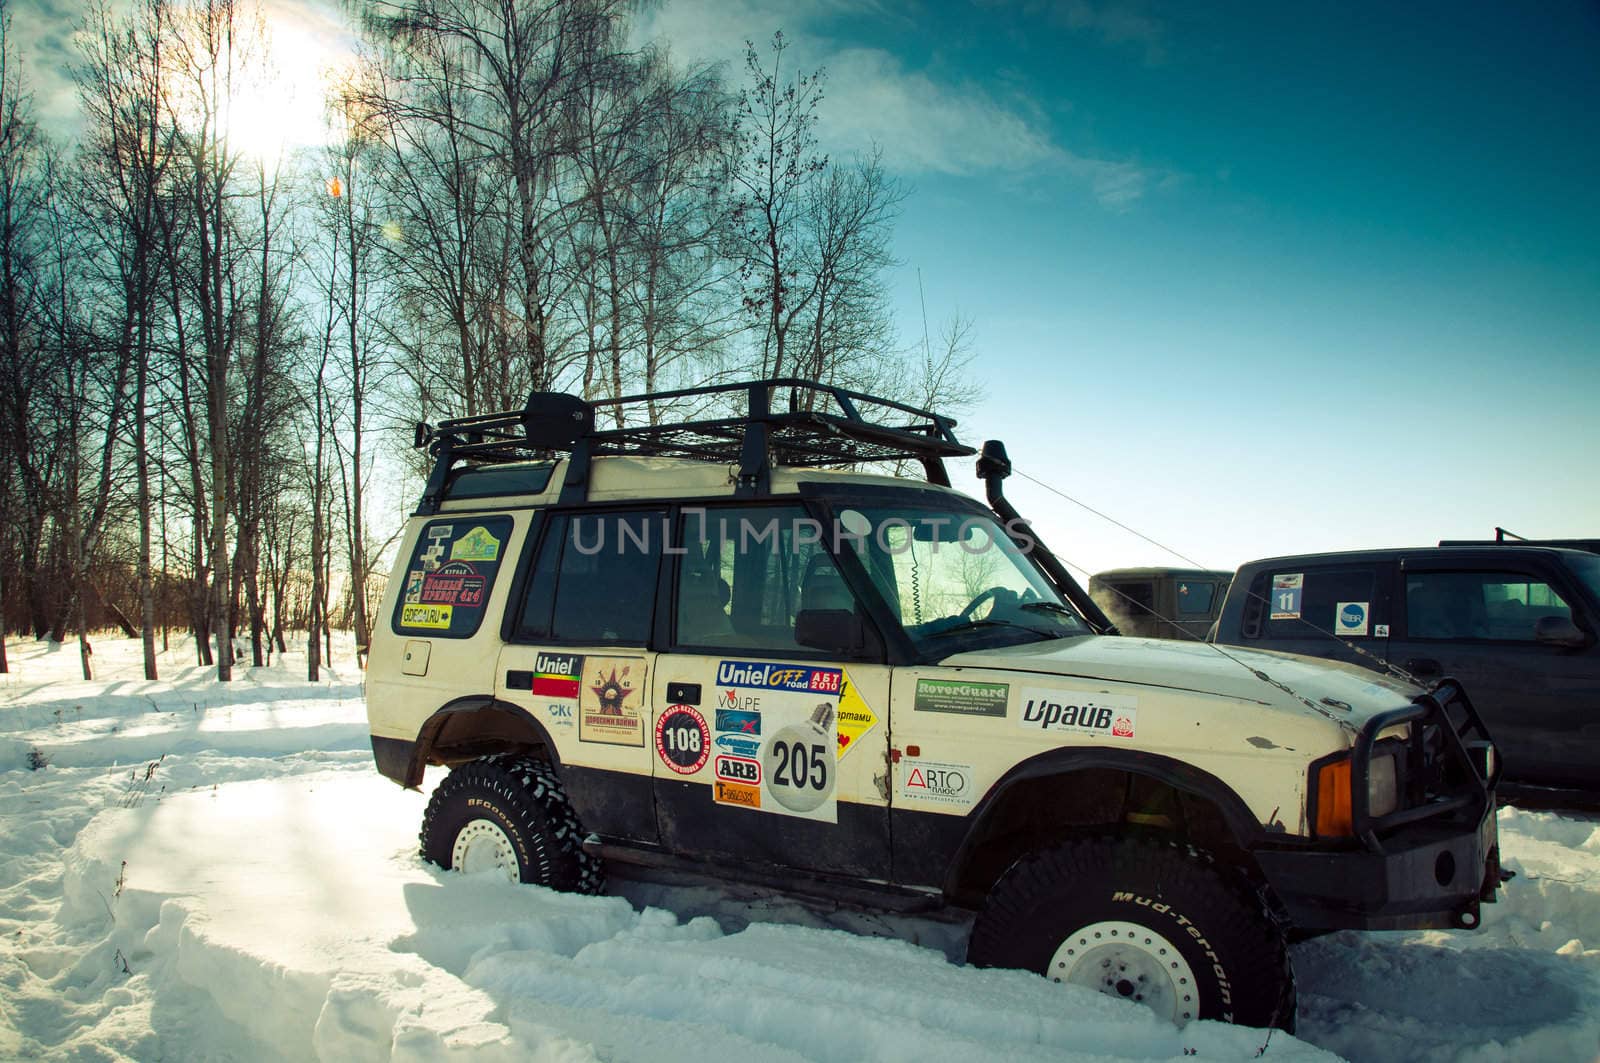 Land Rover Discovery suv
Car on background the Russian winter.
February 19, 2011. Mattrazz Trophy # 18